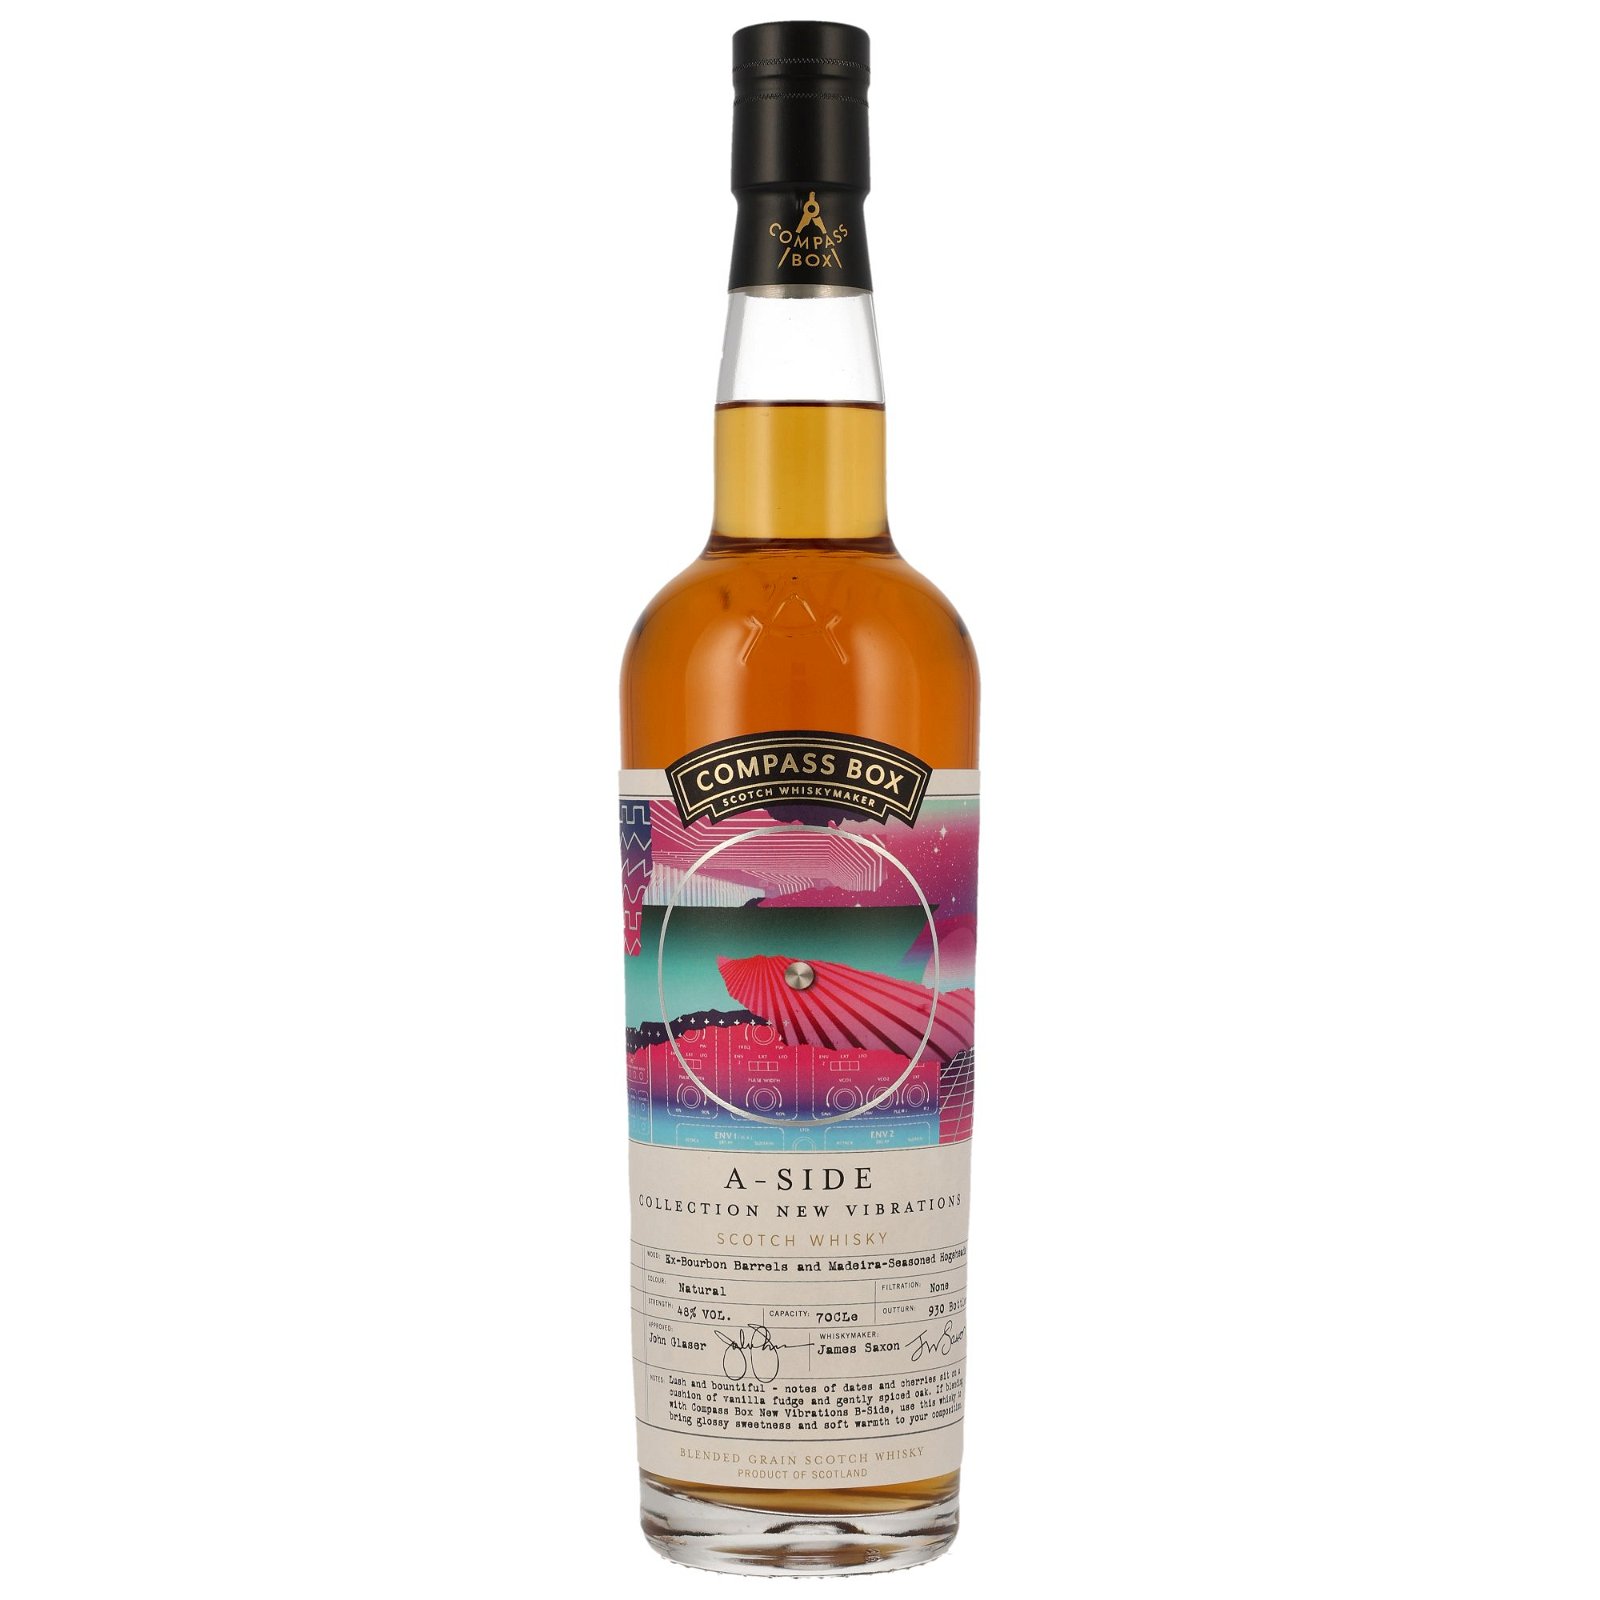 Compass Box A-Side Collection New Vibrations